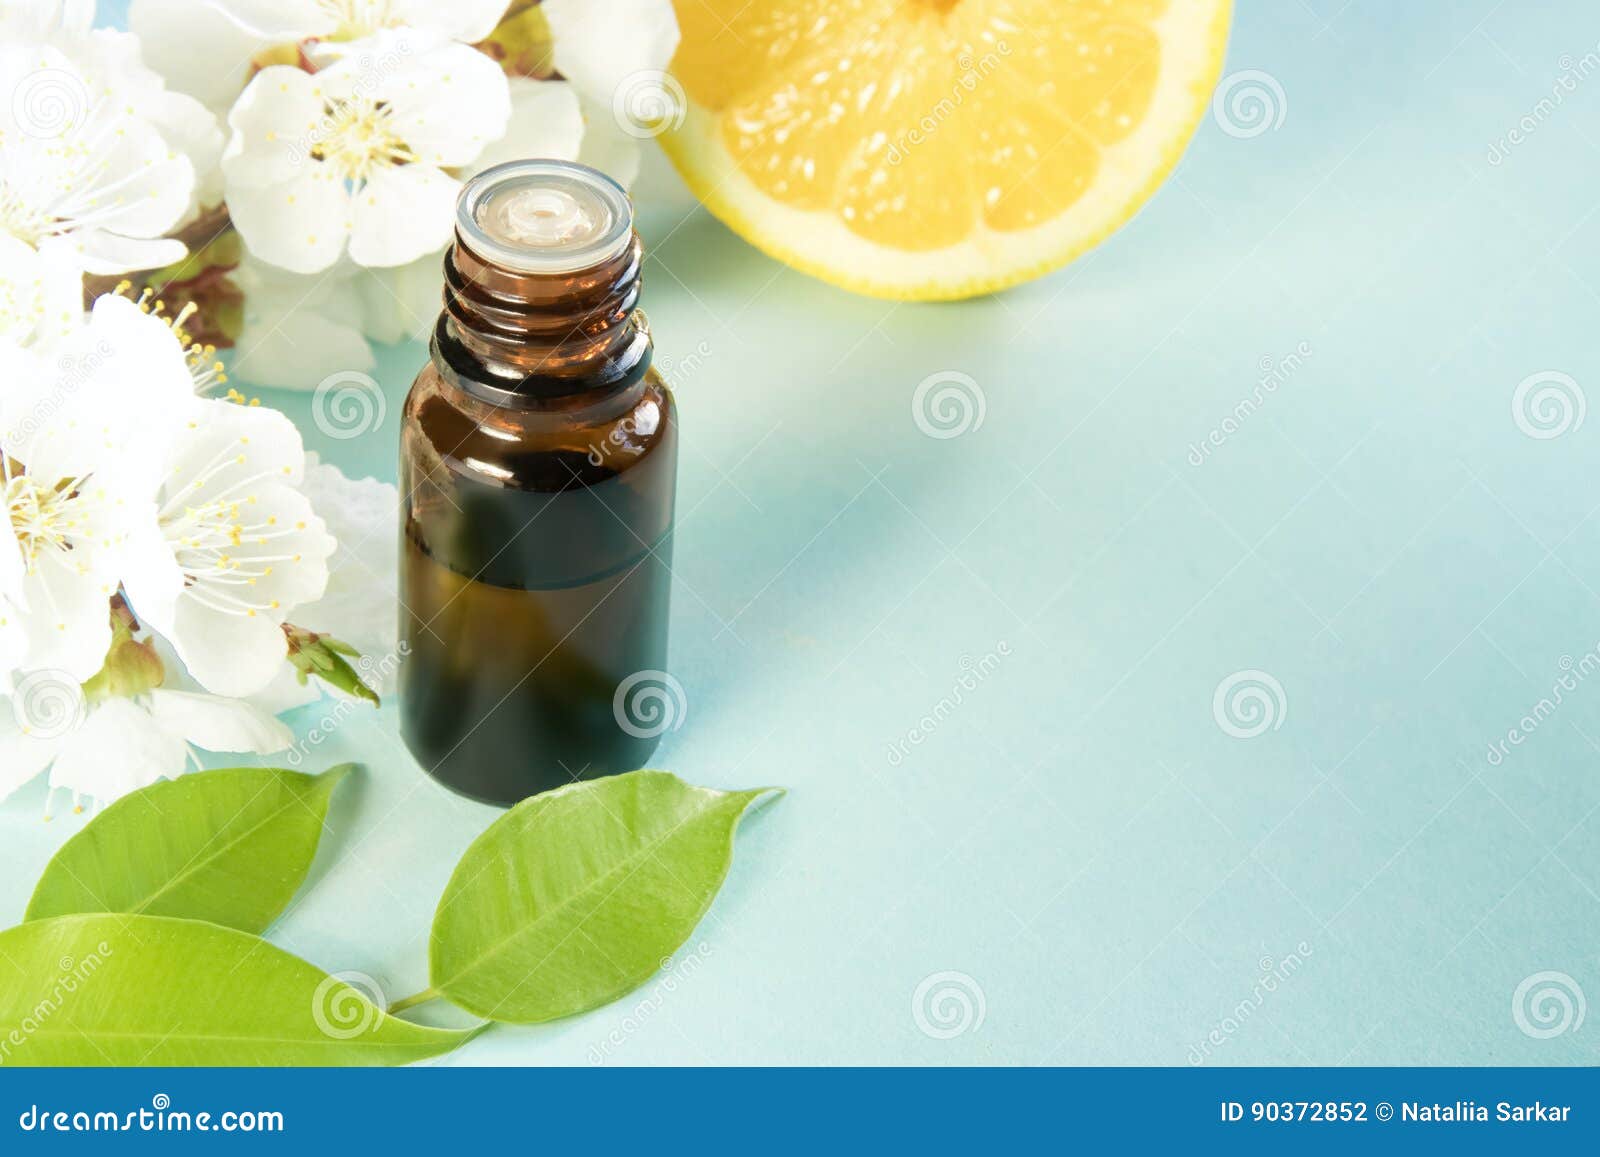 spring aromatherapy with citrus and essential oils